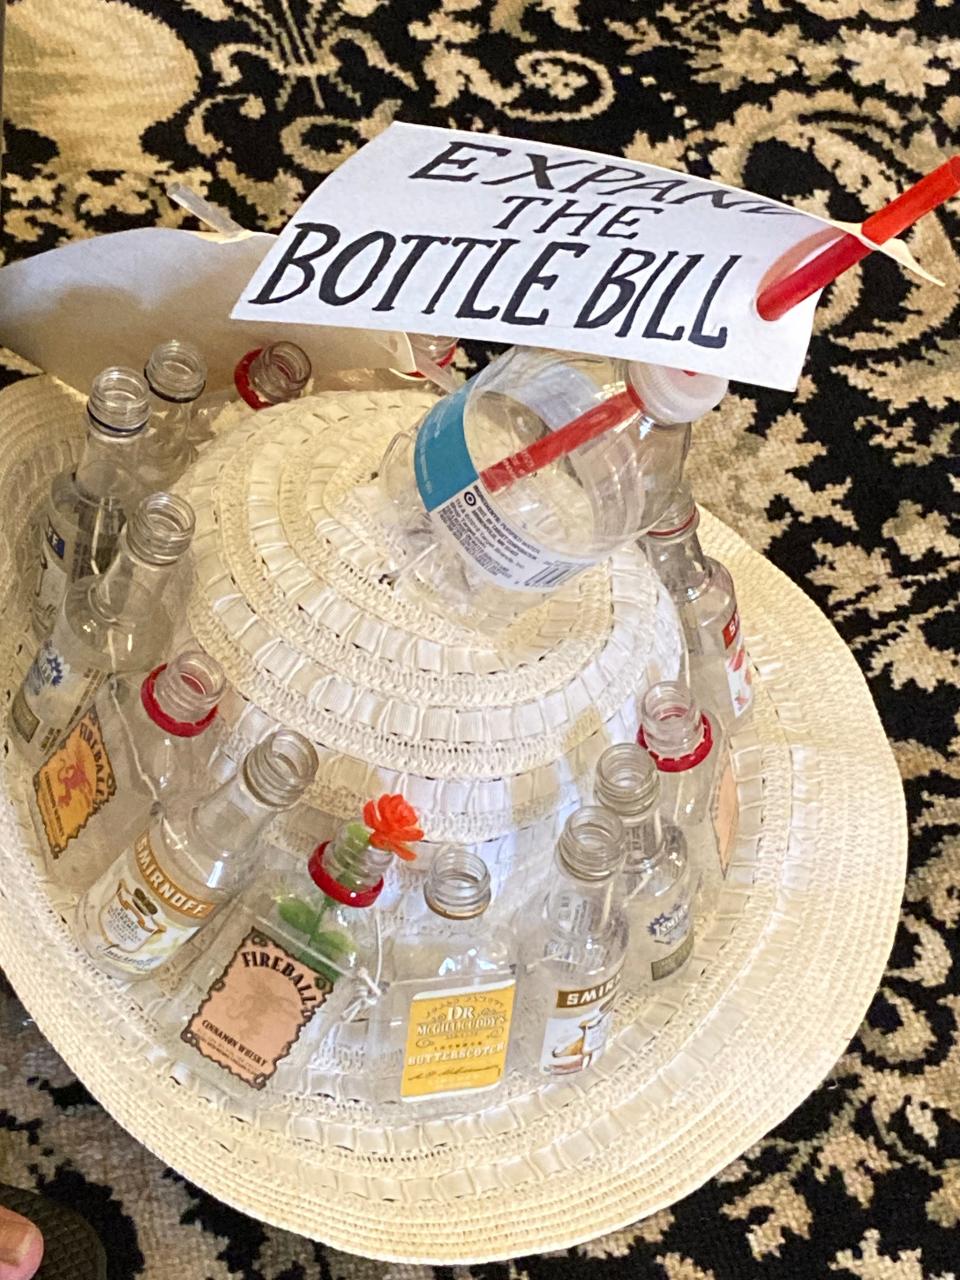 The hat belonging to Eileen Ryan, the leader of Beyond Plastics in Greater Boston, a Watertown resident, decorated by some of the single-use plastics targeted by the coalition aiming to update the state's Bottle Bill as well as reduce the use of certain plastics